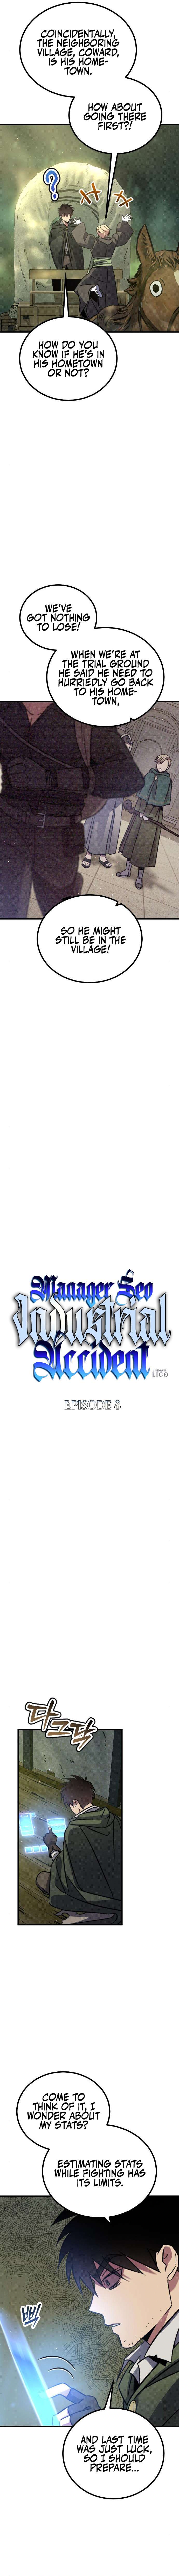 Manager Seo Industrial Accident - chapter 8 - #4